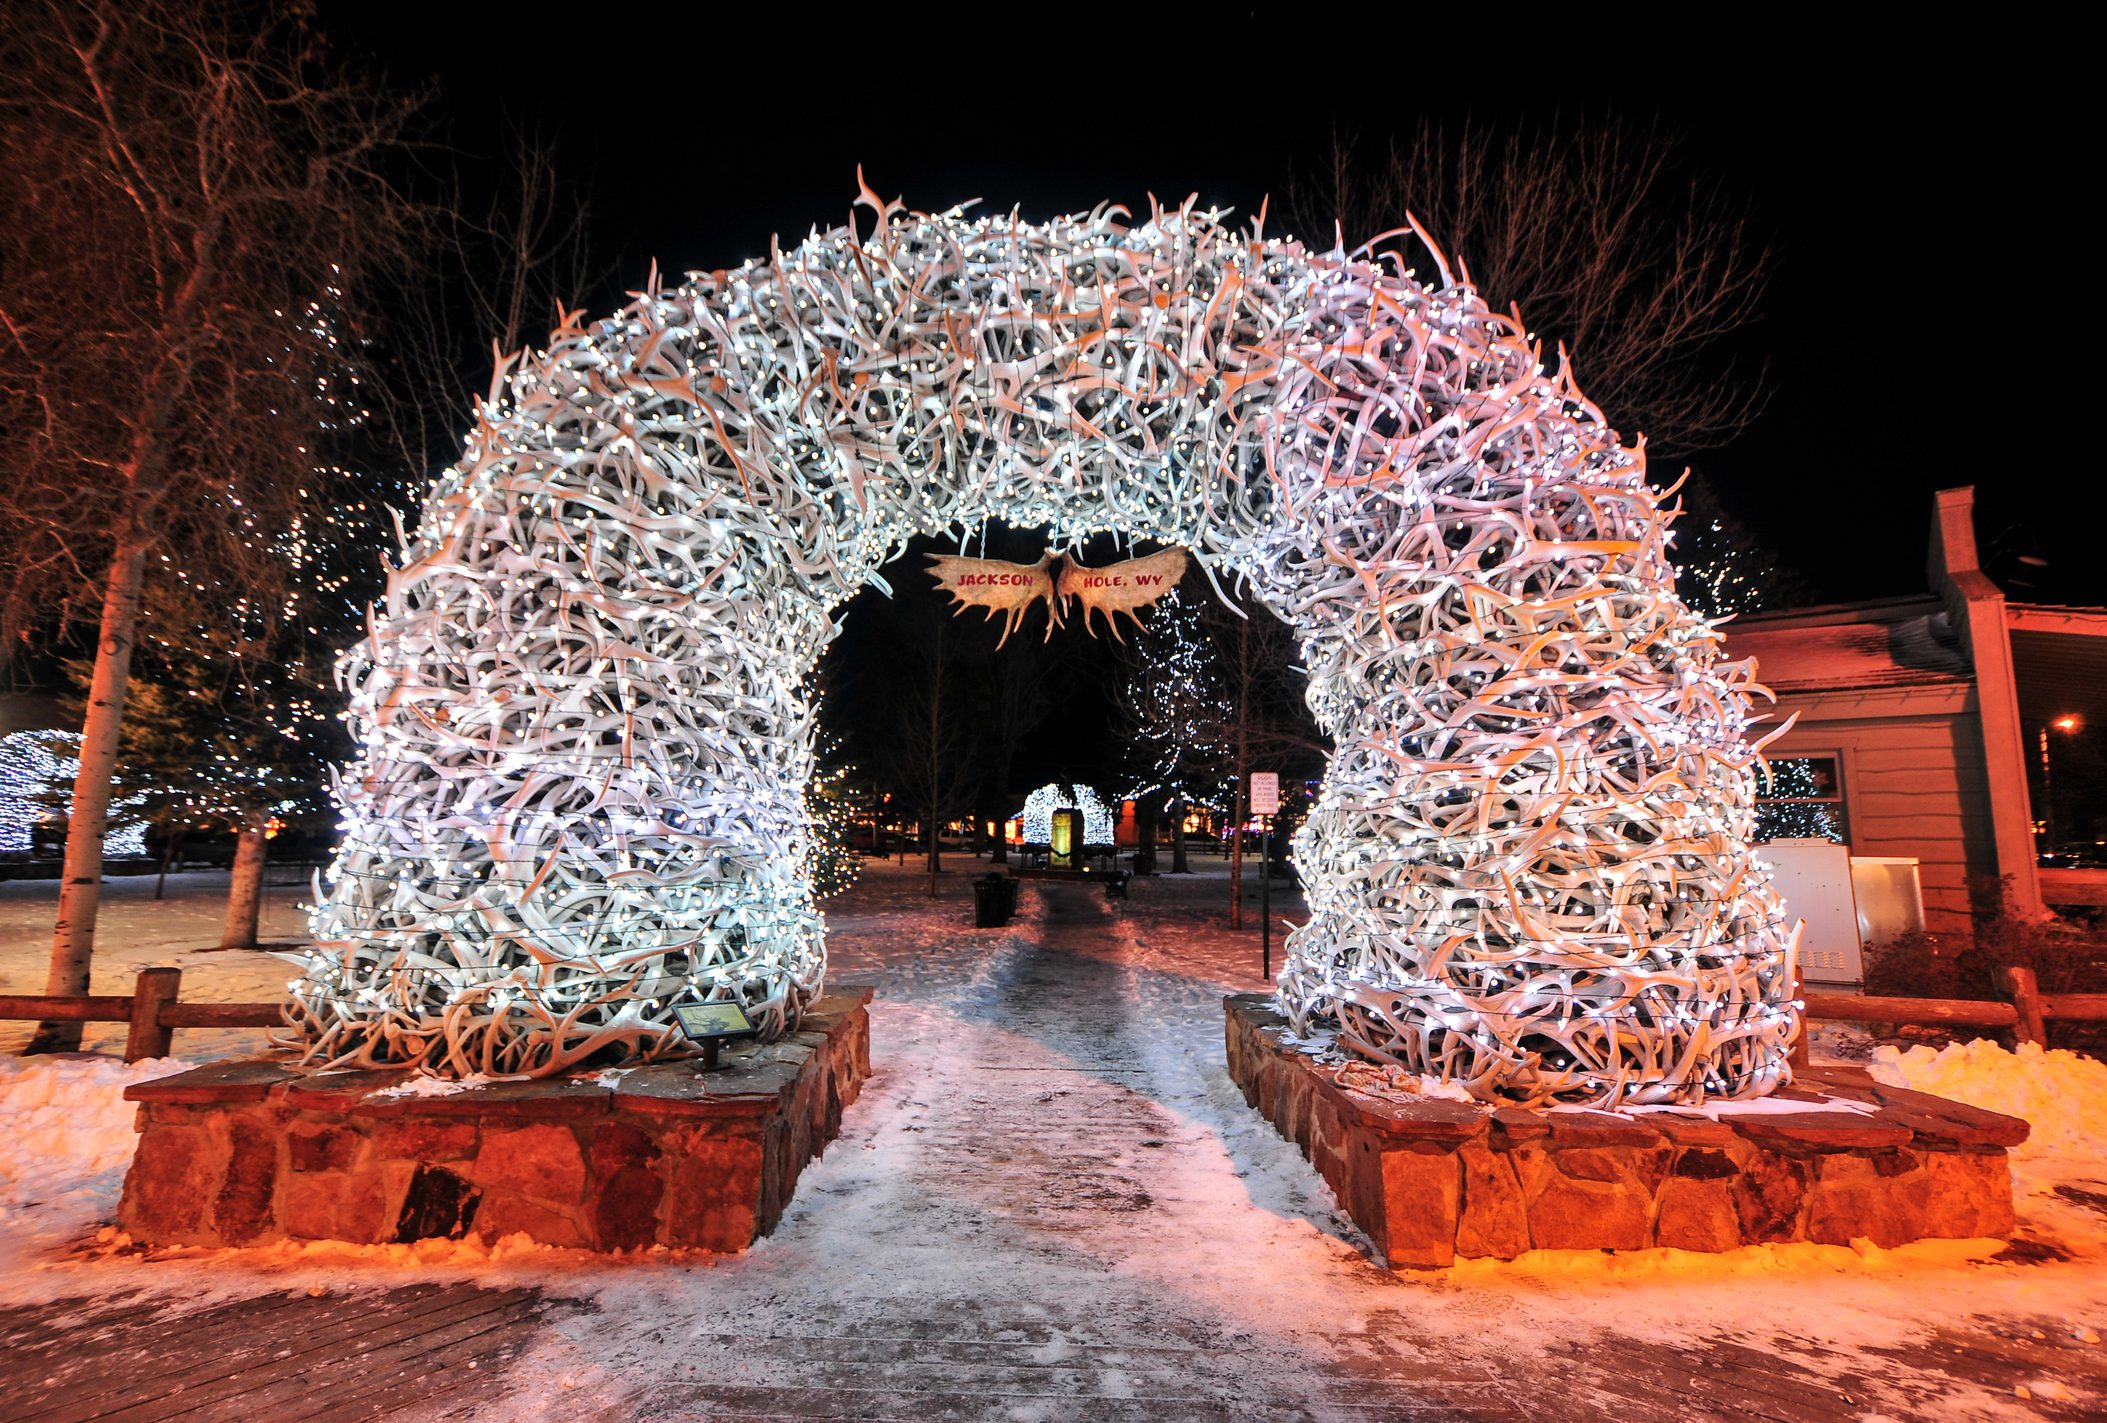 <p><strong>Best for:</strong> Animal lovers</p> <p>Where else can you take sleigh rides to see elk? This mountain town is surrounded by ski resorts, Grand Teton National Park, and the National Elk Refuge, where you can take a sleigh ride to view the aforementioned animals. Downtown, thousands of lights will illuminate the famous elk antler arches, and children can leave a letter for Santa in his mailbox. Santa will also "drop in" from the aerial tram on Christmas Eve. Resorts and hotels throughout the area also offer their own seasonal festivities as well.</p> <p>For an affordable place to stay in this expensive ski town, try the Elk Country Inn. Rustic yet comfortable, the log cabin-themed accommodations are within walking distance of the antler arches.</p> <p class="listicle-page__cta-button-shop"><a class="shop-btn" href="https://www.tripadvisor.com/Hotel_Review-g60491-d248257-Reviews-Elk_Country_Inn-Jackson_Jackson_Hole_Wyoming.html">Book Now</a></p>